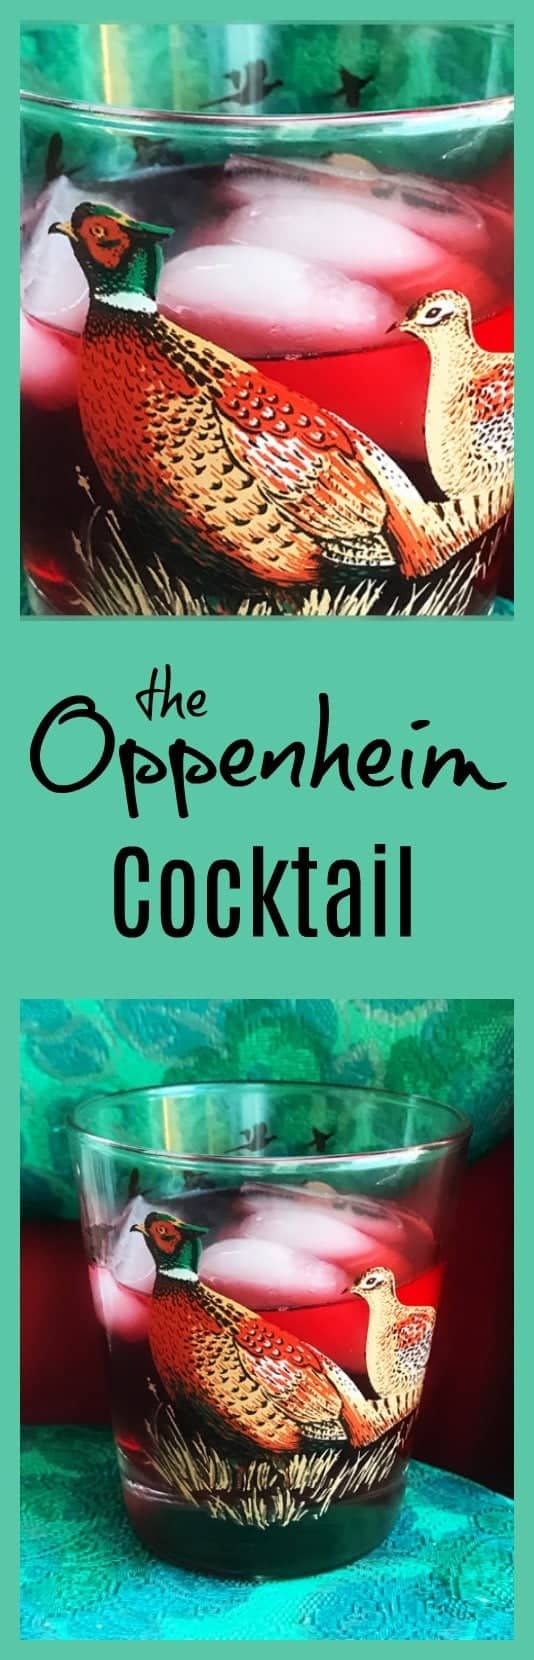 The Oppenheim Cocktail